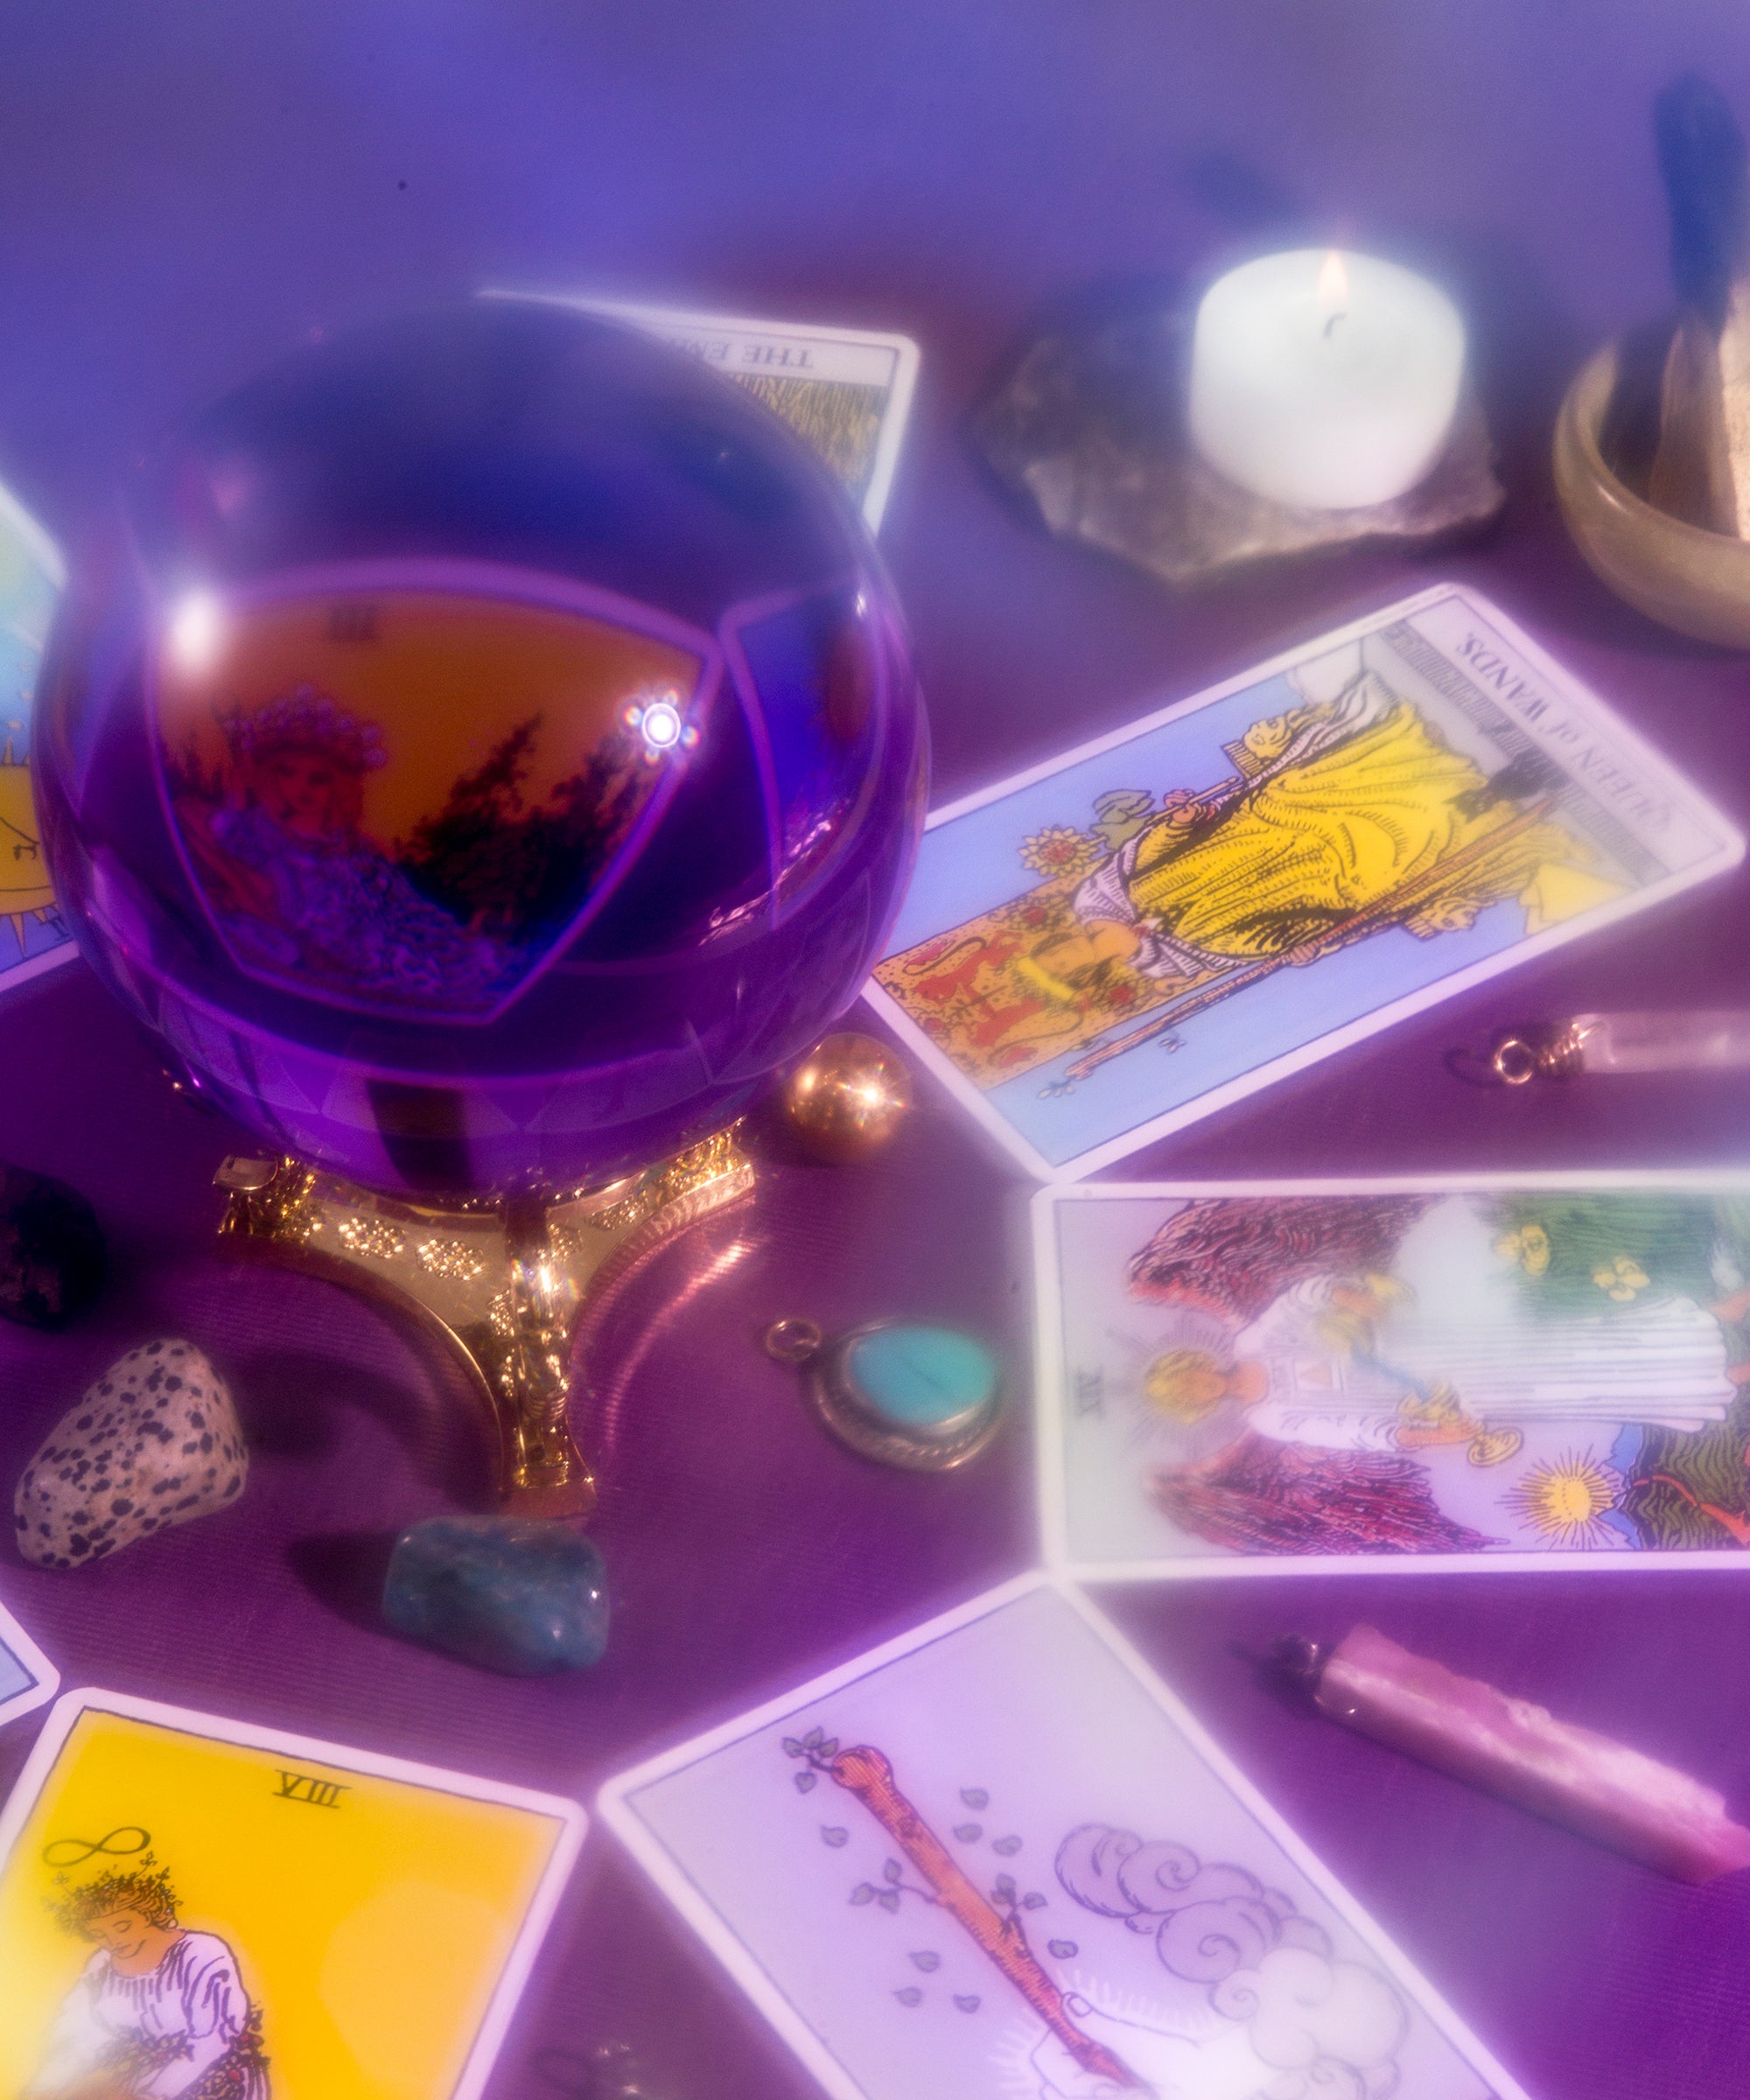 Buy minutes for cheaper psychic readings